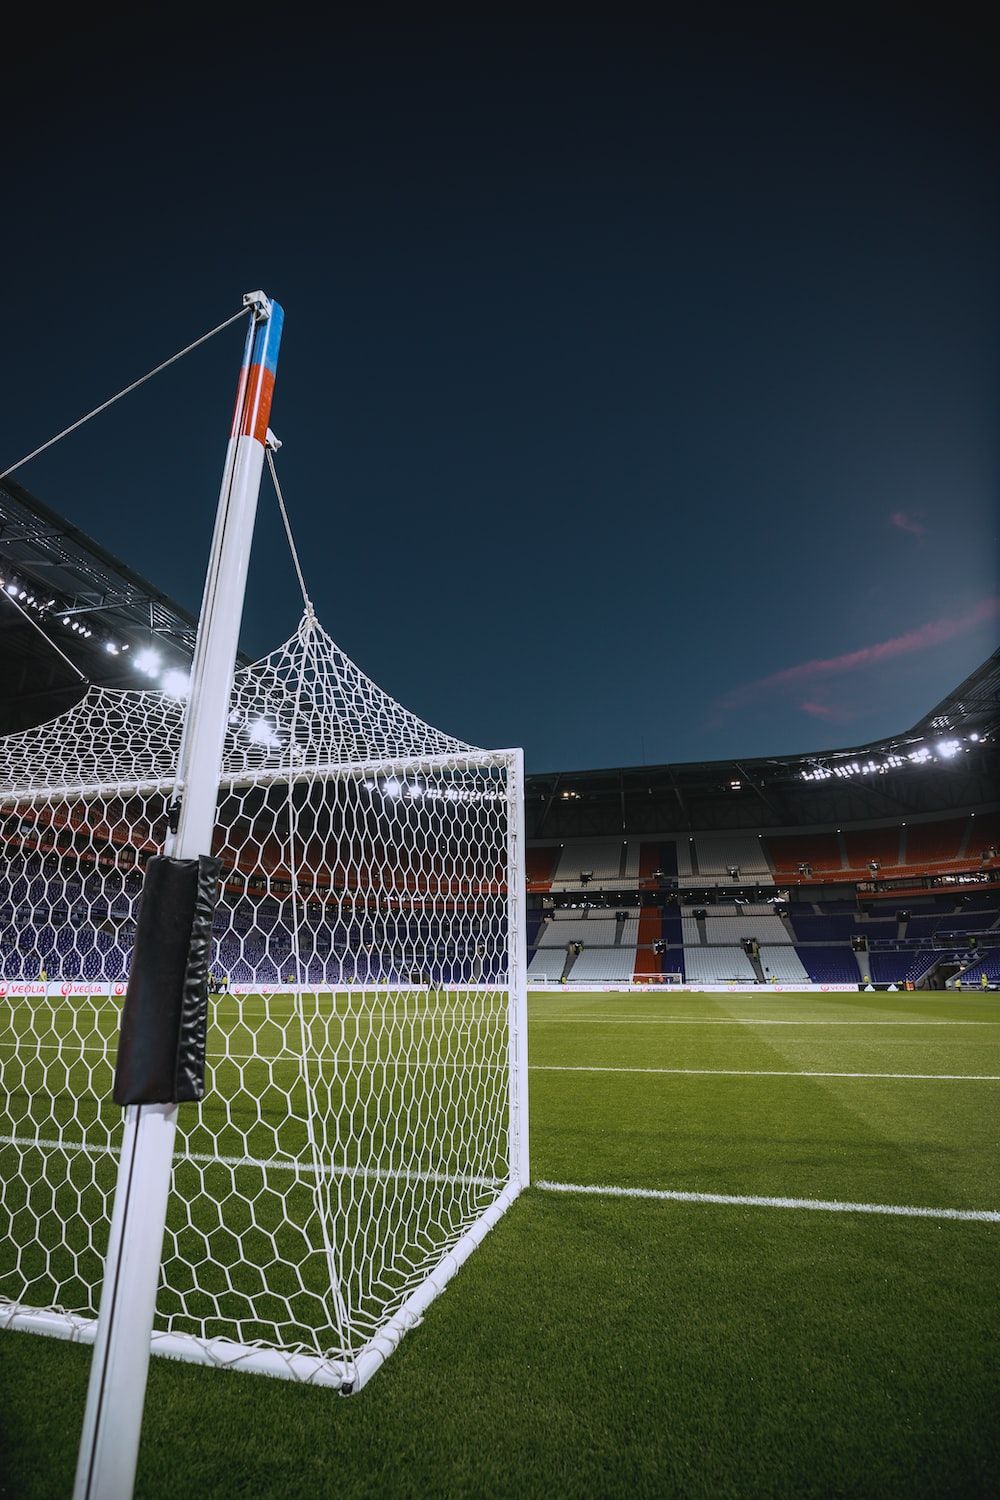 A soccer goal in the middle of an empty field - Soccer